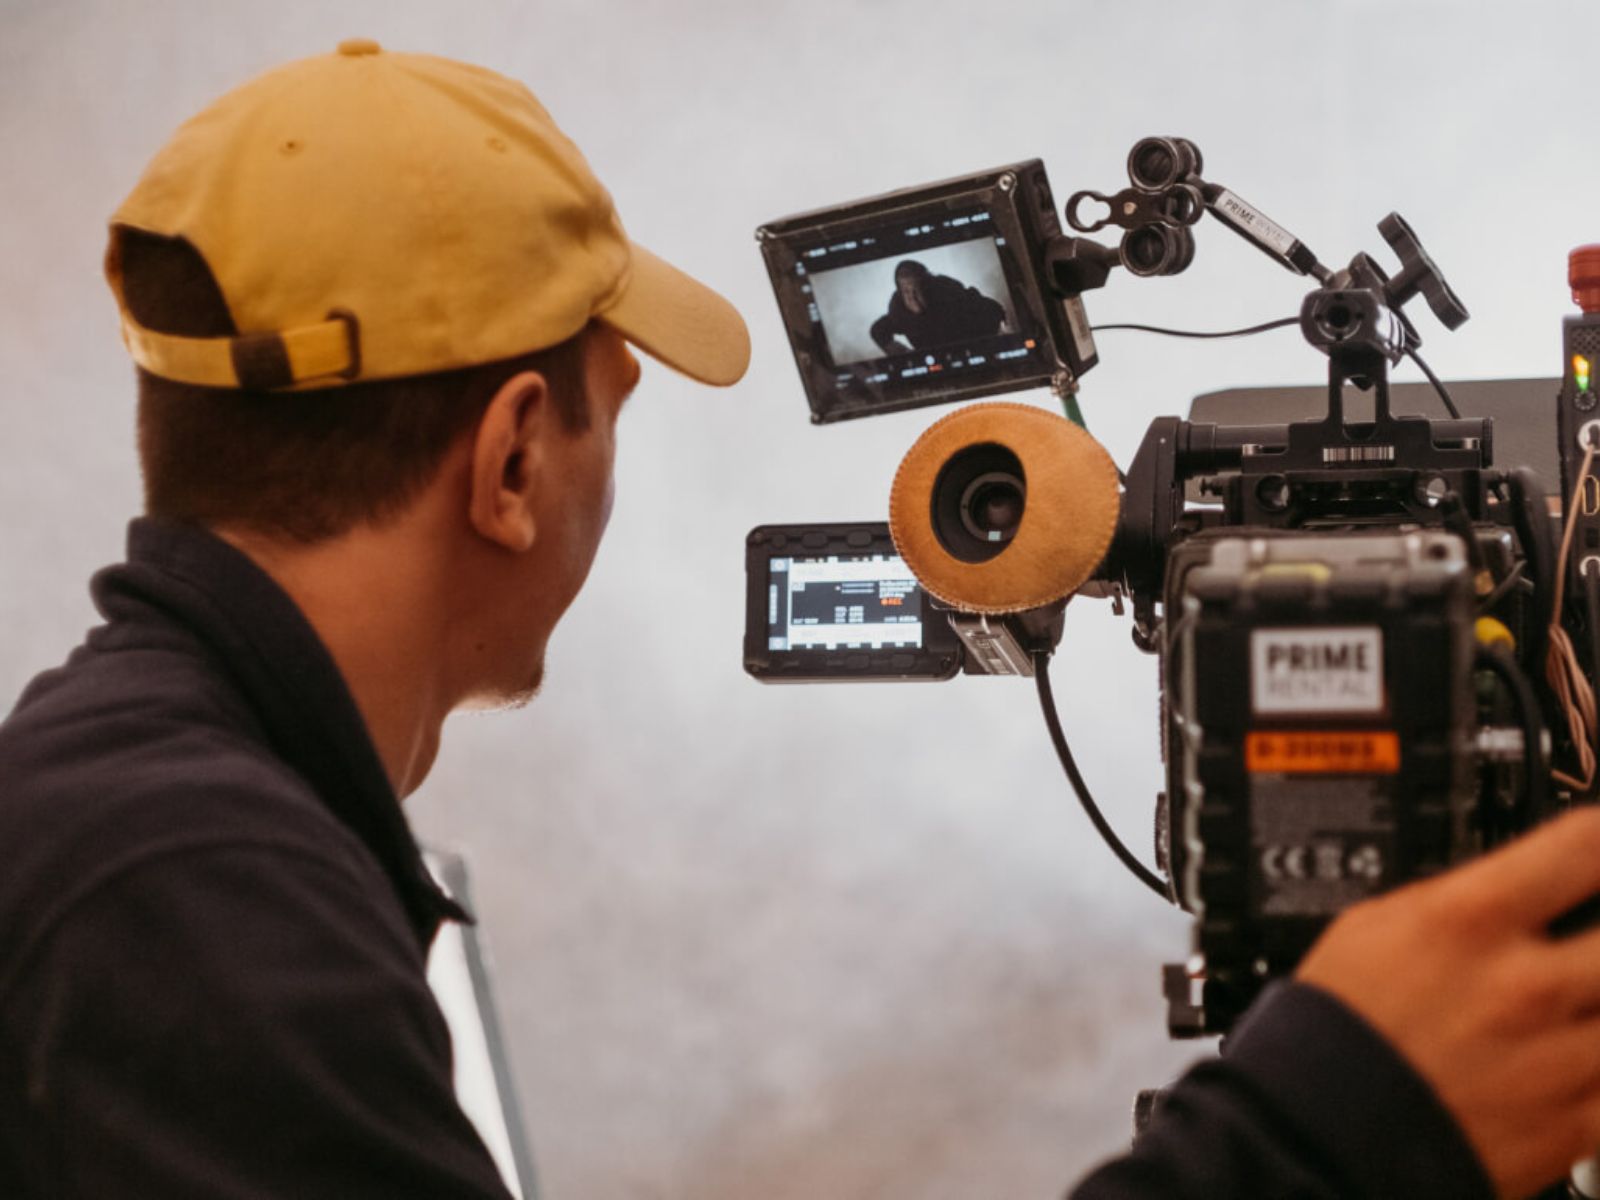 Person in a yellow cap operating a professional film camera with a monitor attached.